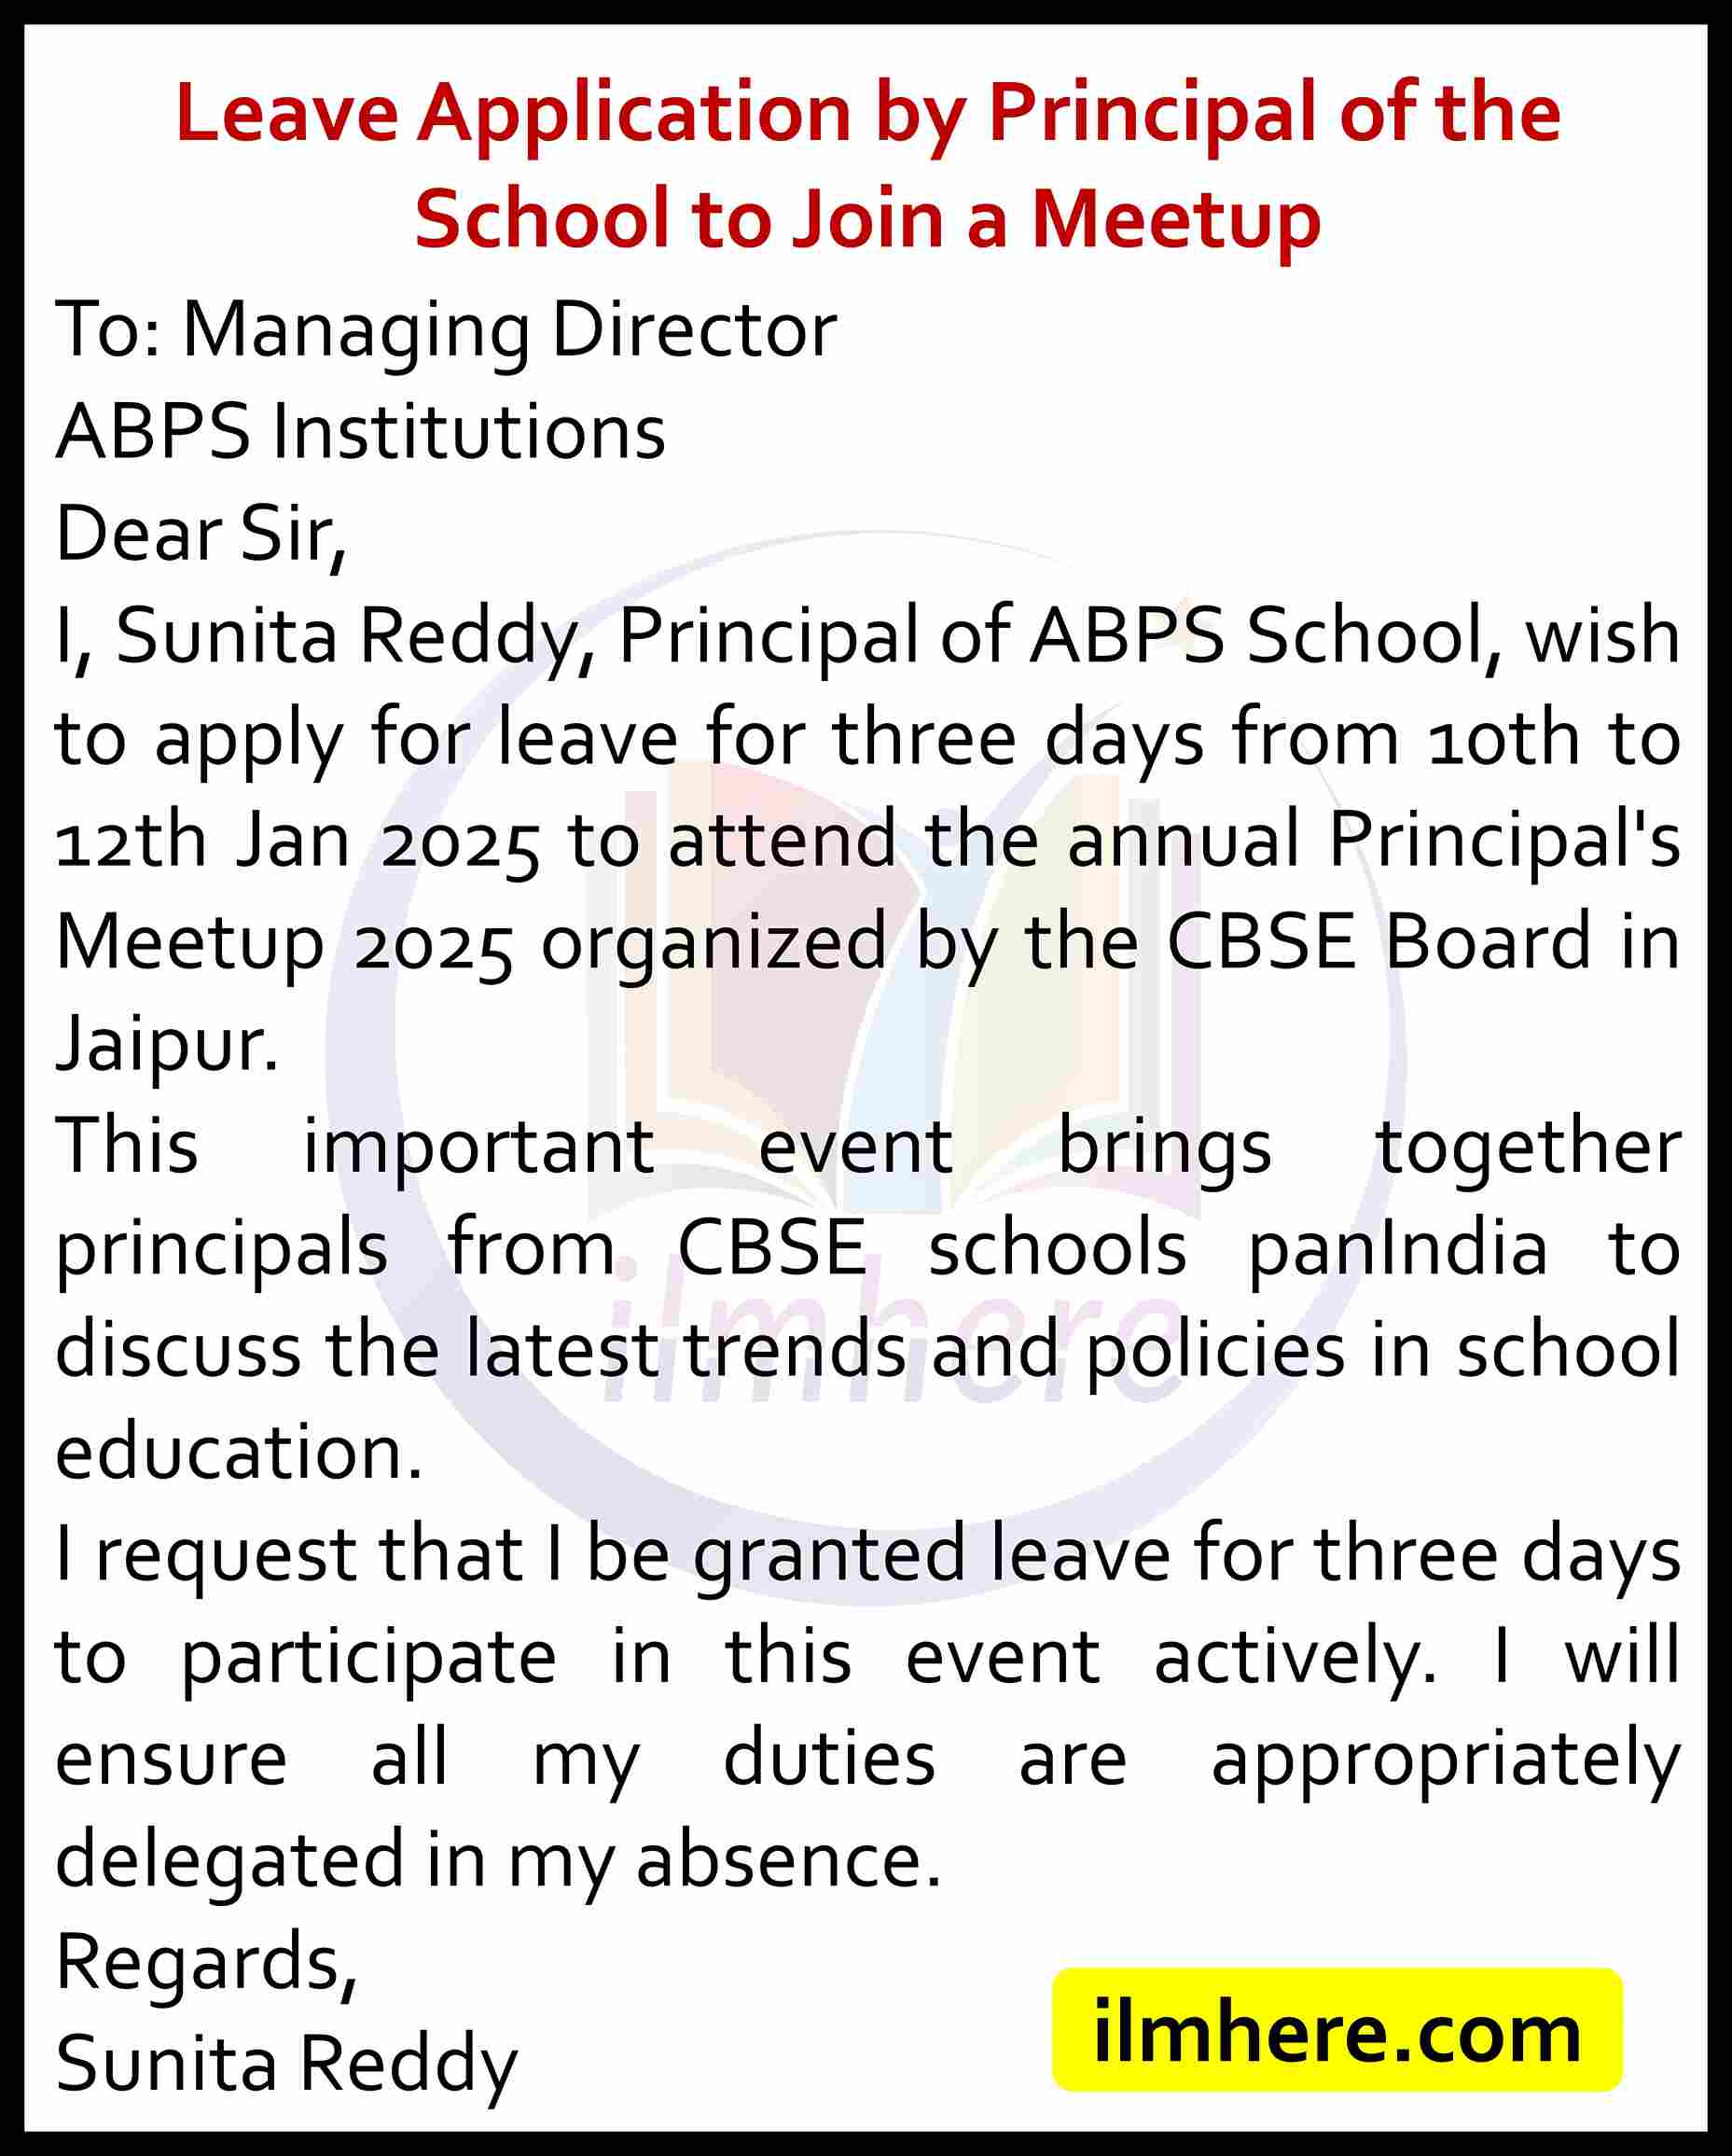 Leave Application by Principal of the School to Join a Meetup